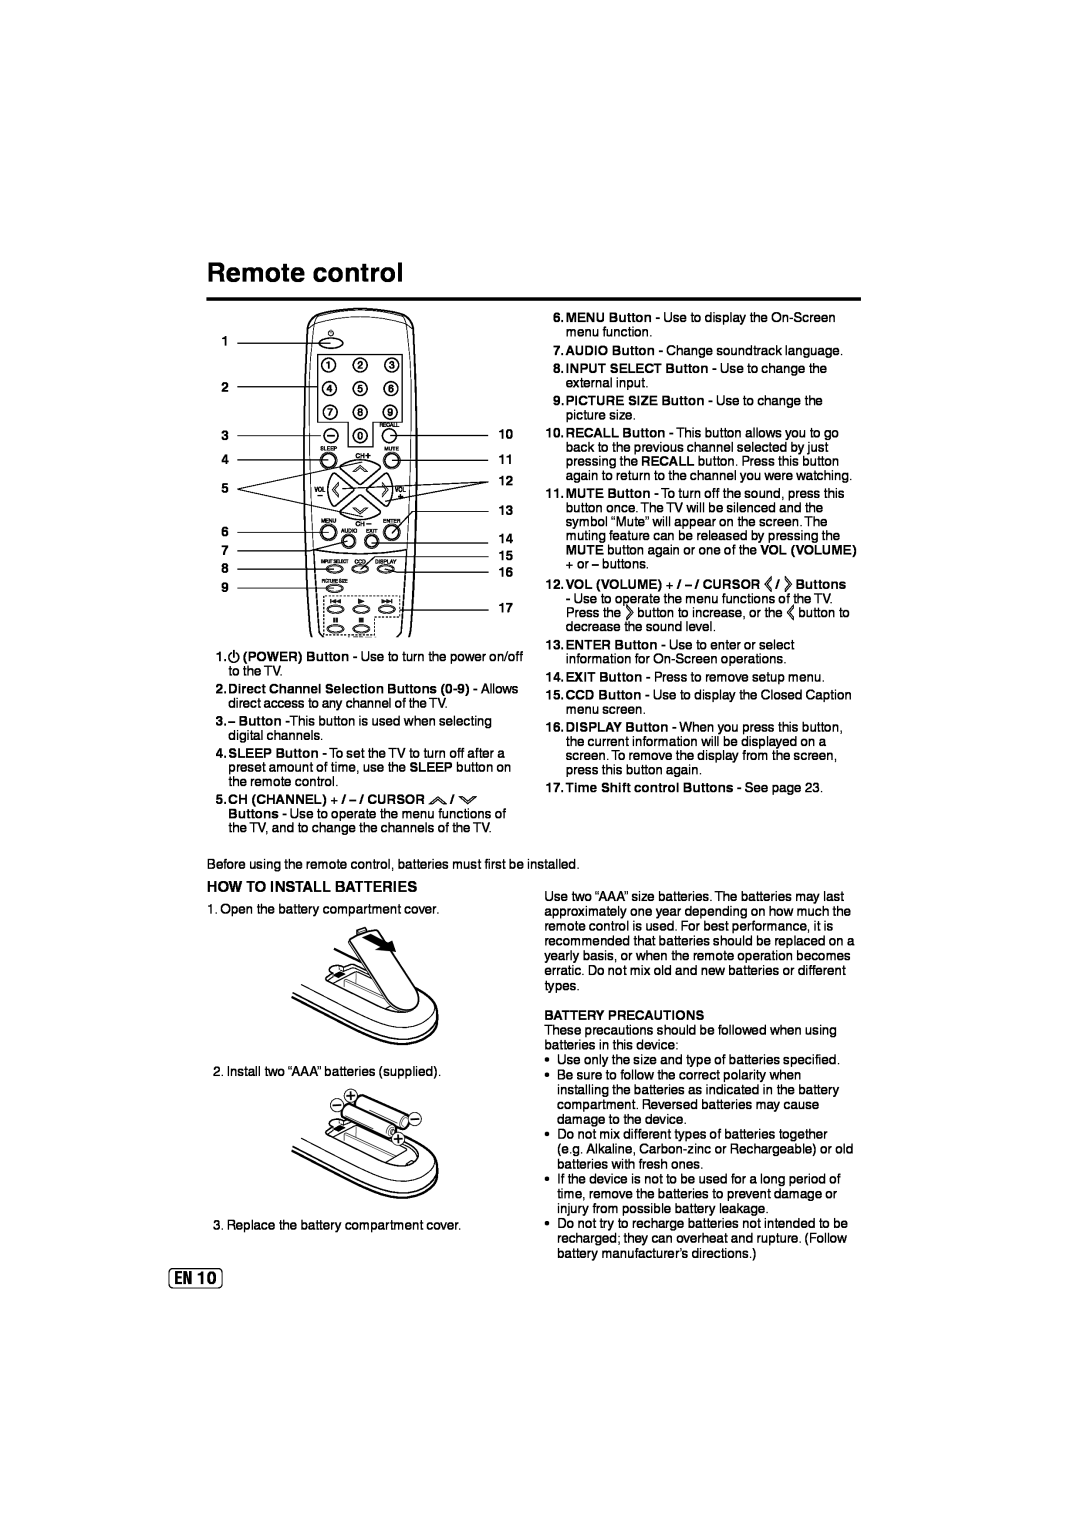 Sansui SLED2237 How To Install Batteries, MENU Button - Use to display the On-Screen, menu function, external input, types 